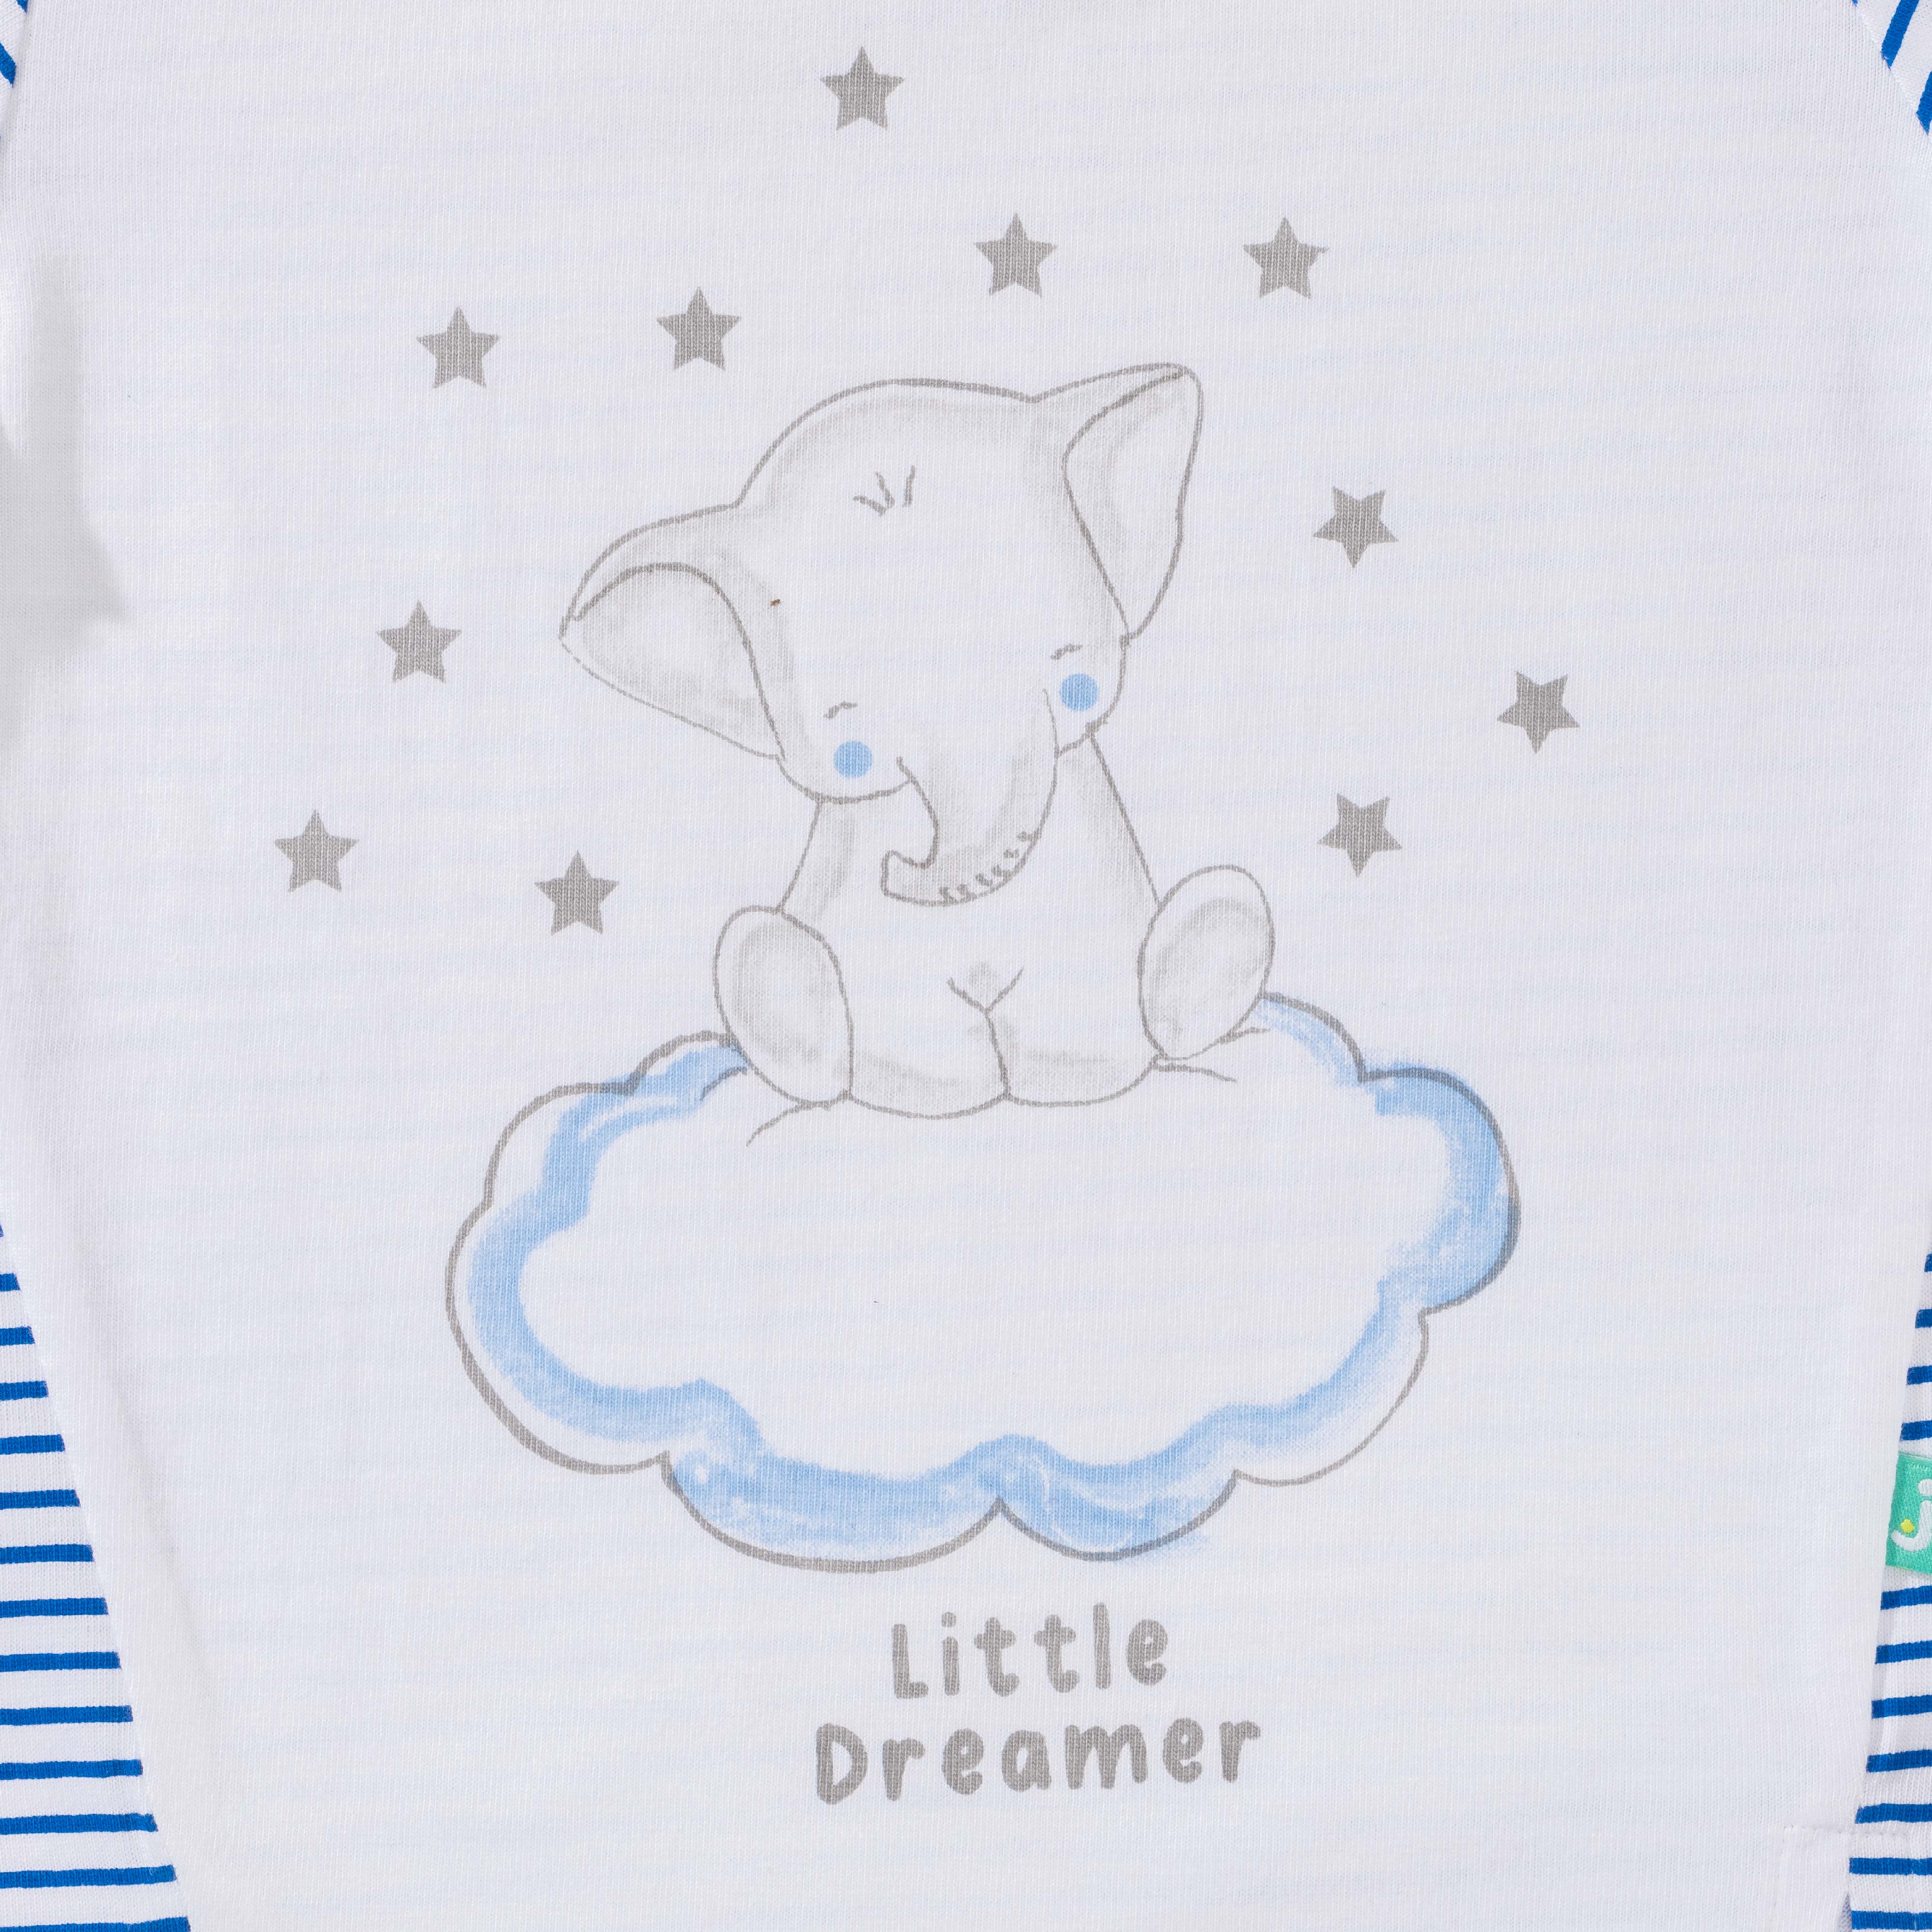 Baby Boys Striped & Little Dreamer Printed T Shirt & Solid Shorts Set